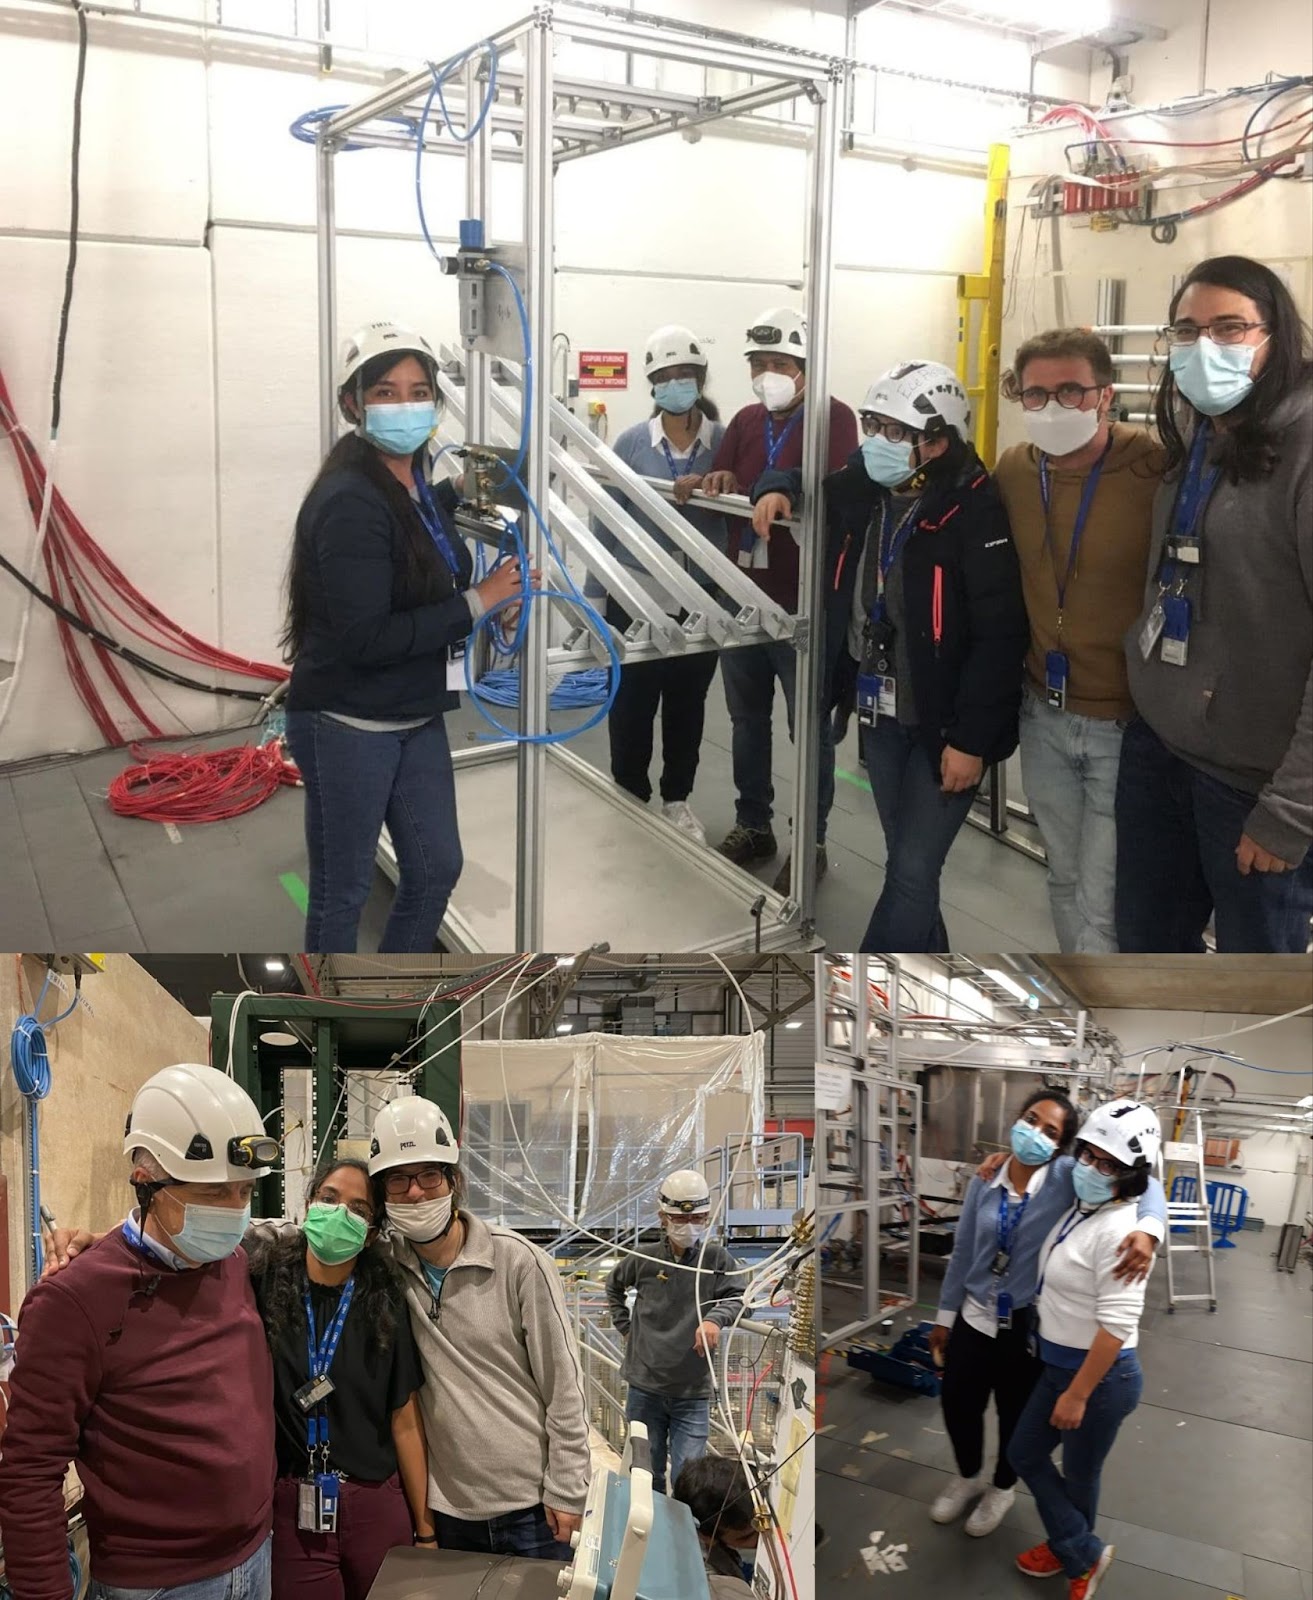 Moments with RPC colleagues during our test beam at CERN in October 2021 (Credits: Mehar Ali Shah, Ece Asilar and Irakli Lomidze).